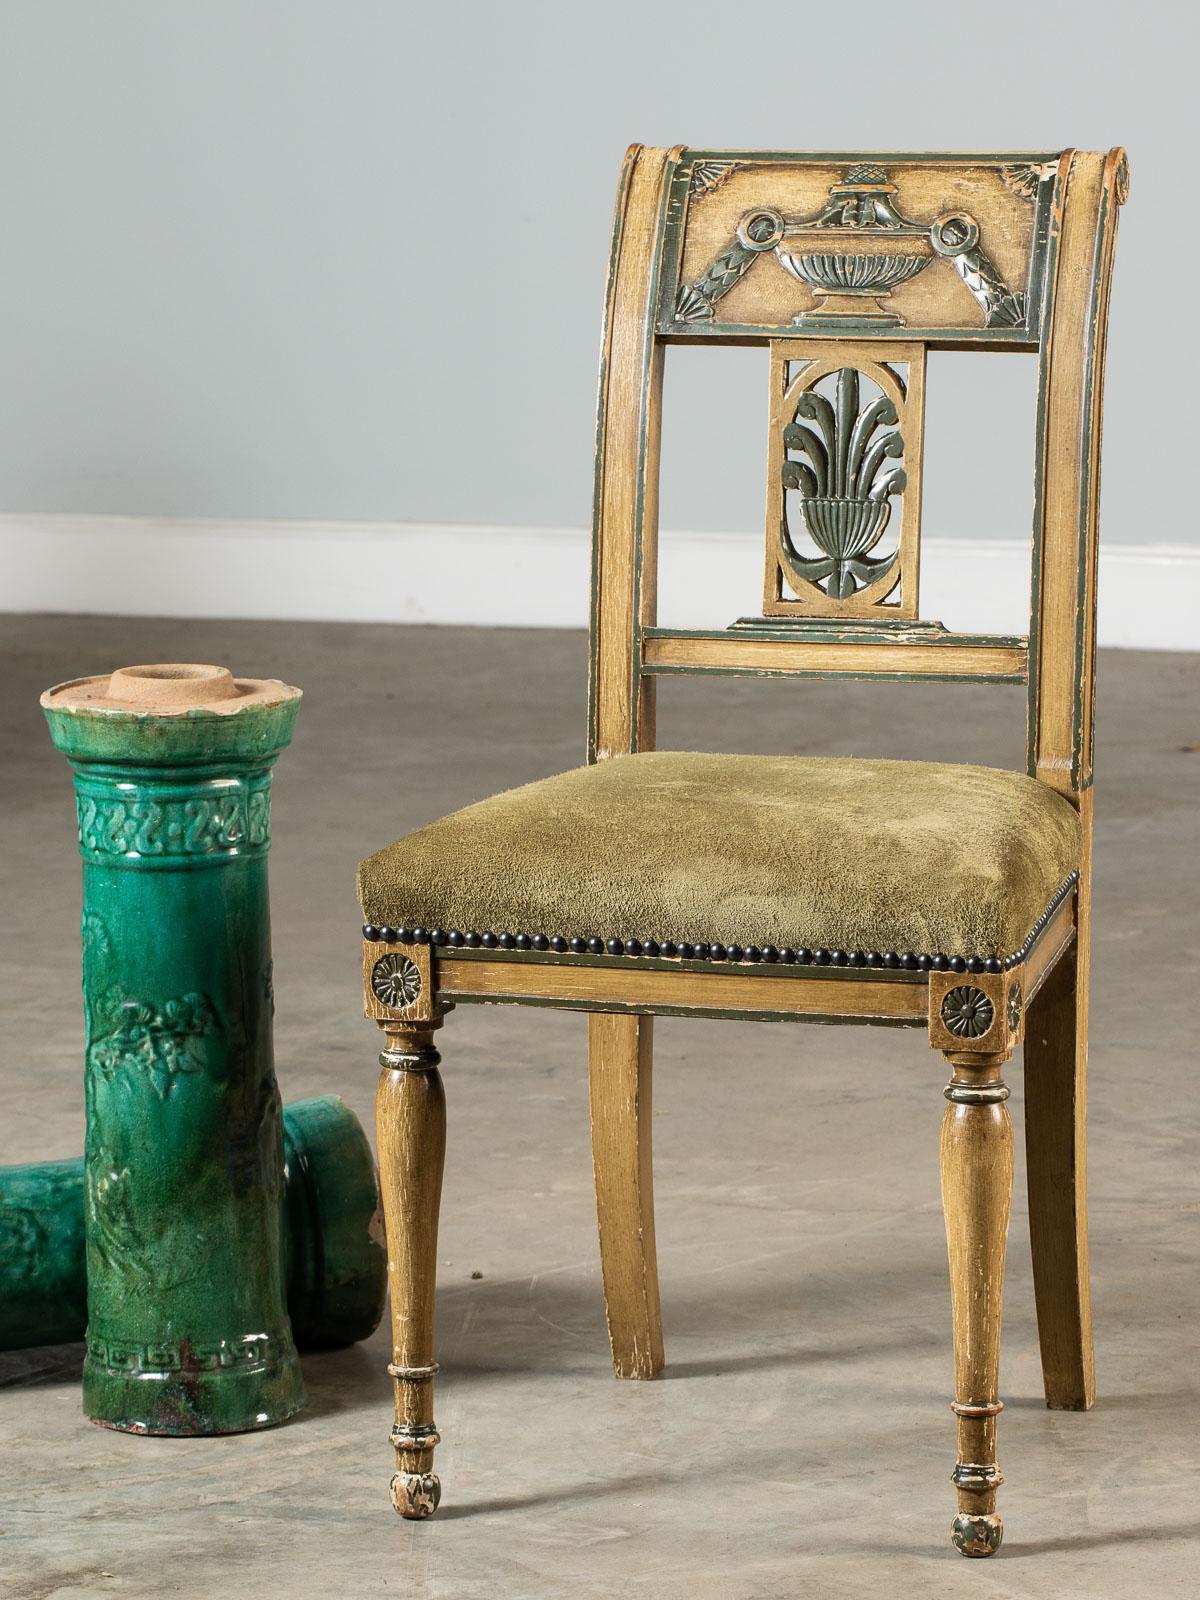 A Directoire Empire style painted side chair from France, circa 1850. Please look closely at the distinctive design details that comprise the makeup of this chair. The two front legs have an elegant shape created from a single piece of timber that